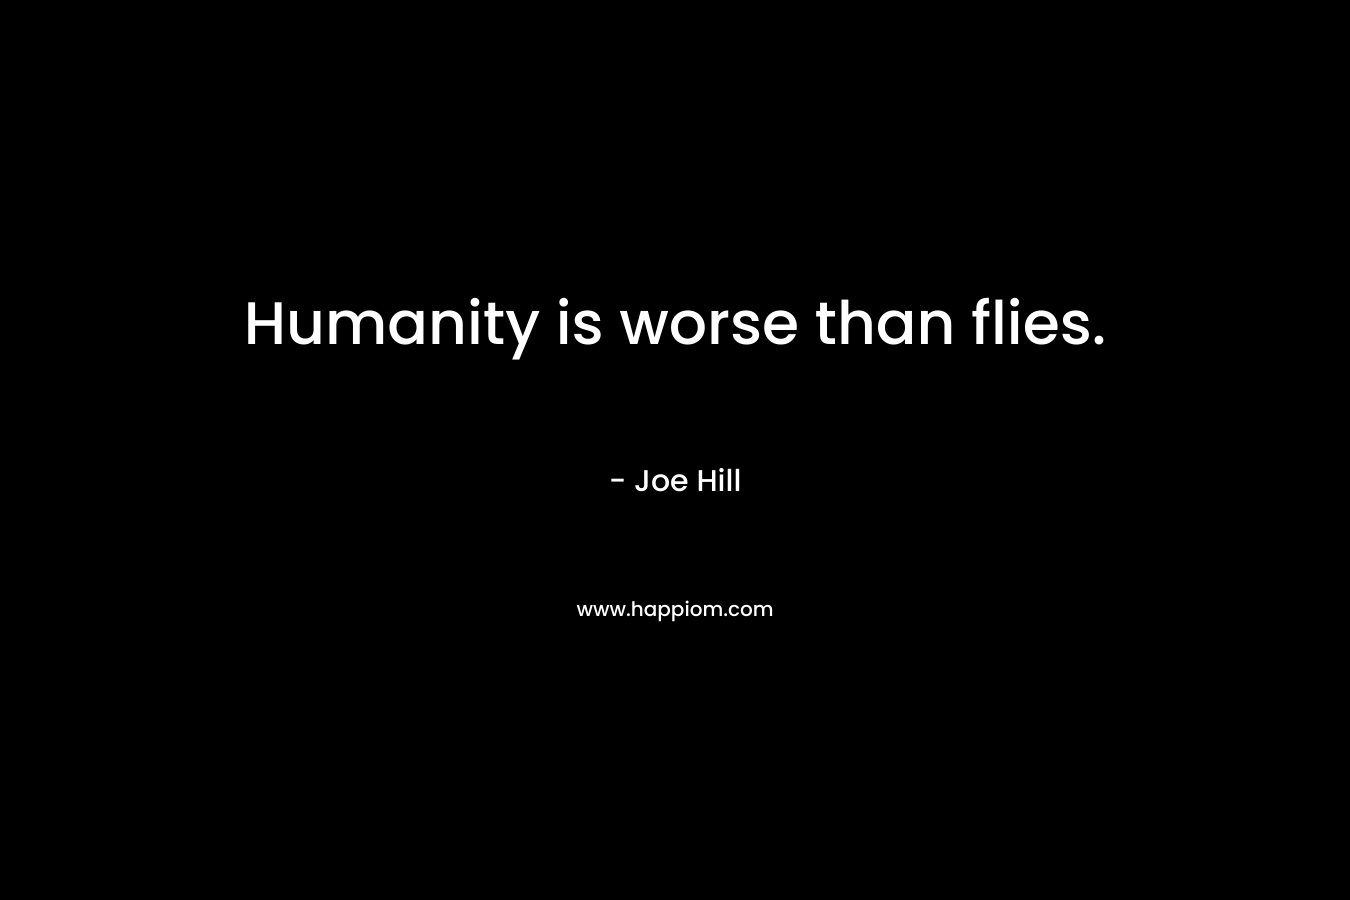 Humanity is worse than flies.